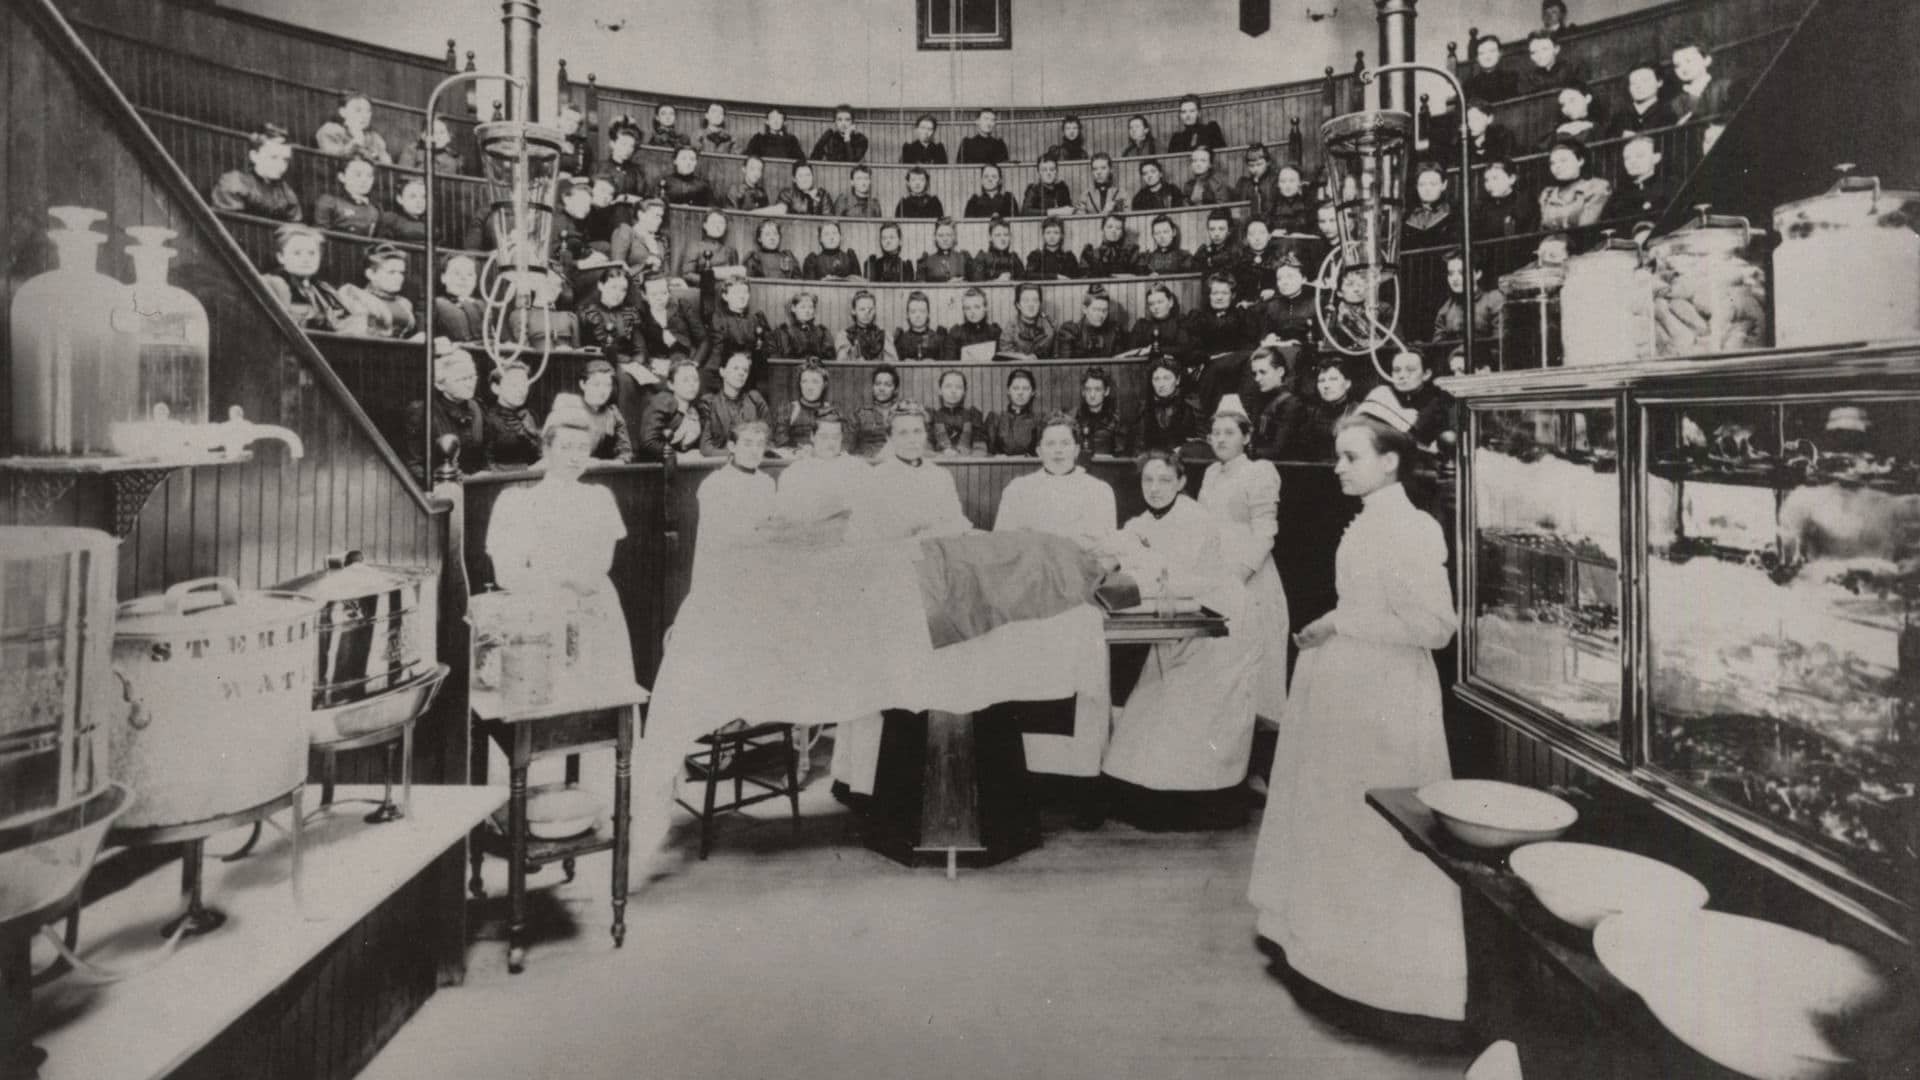 A clinical lecture at the Woman's Medical College of Pennsylvania in the 1890s.